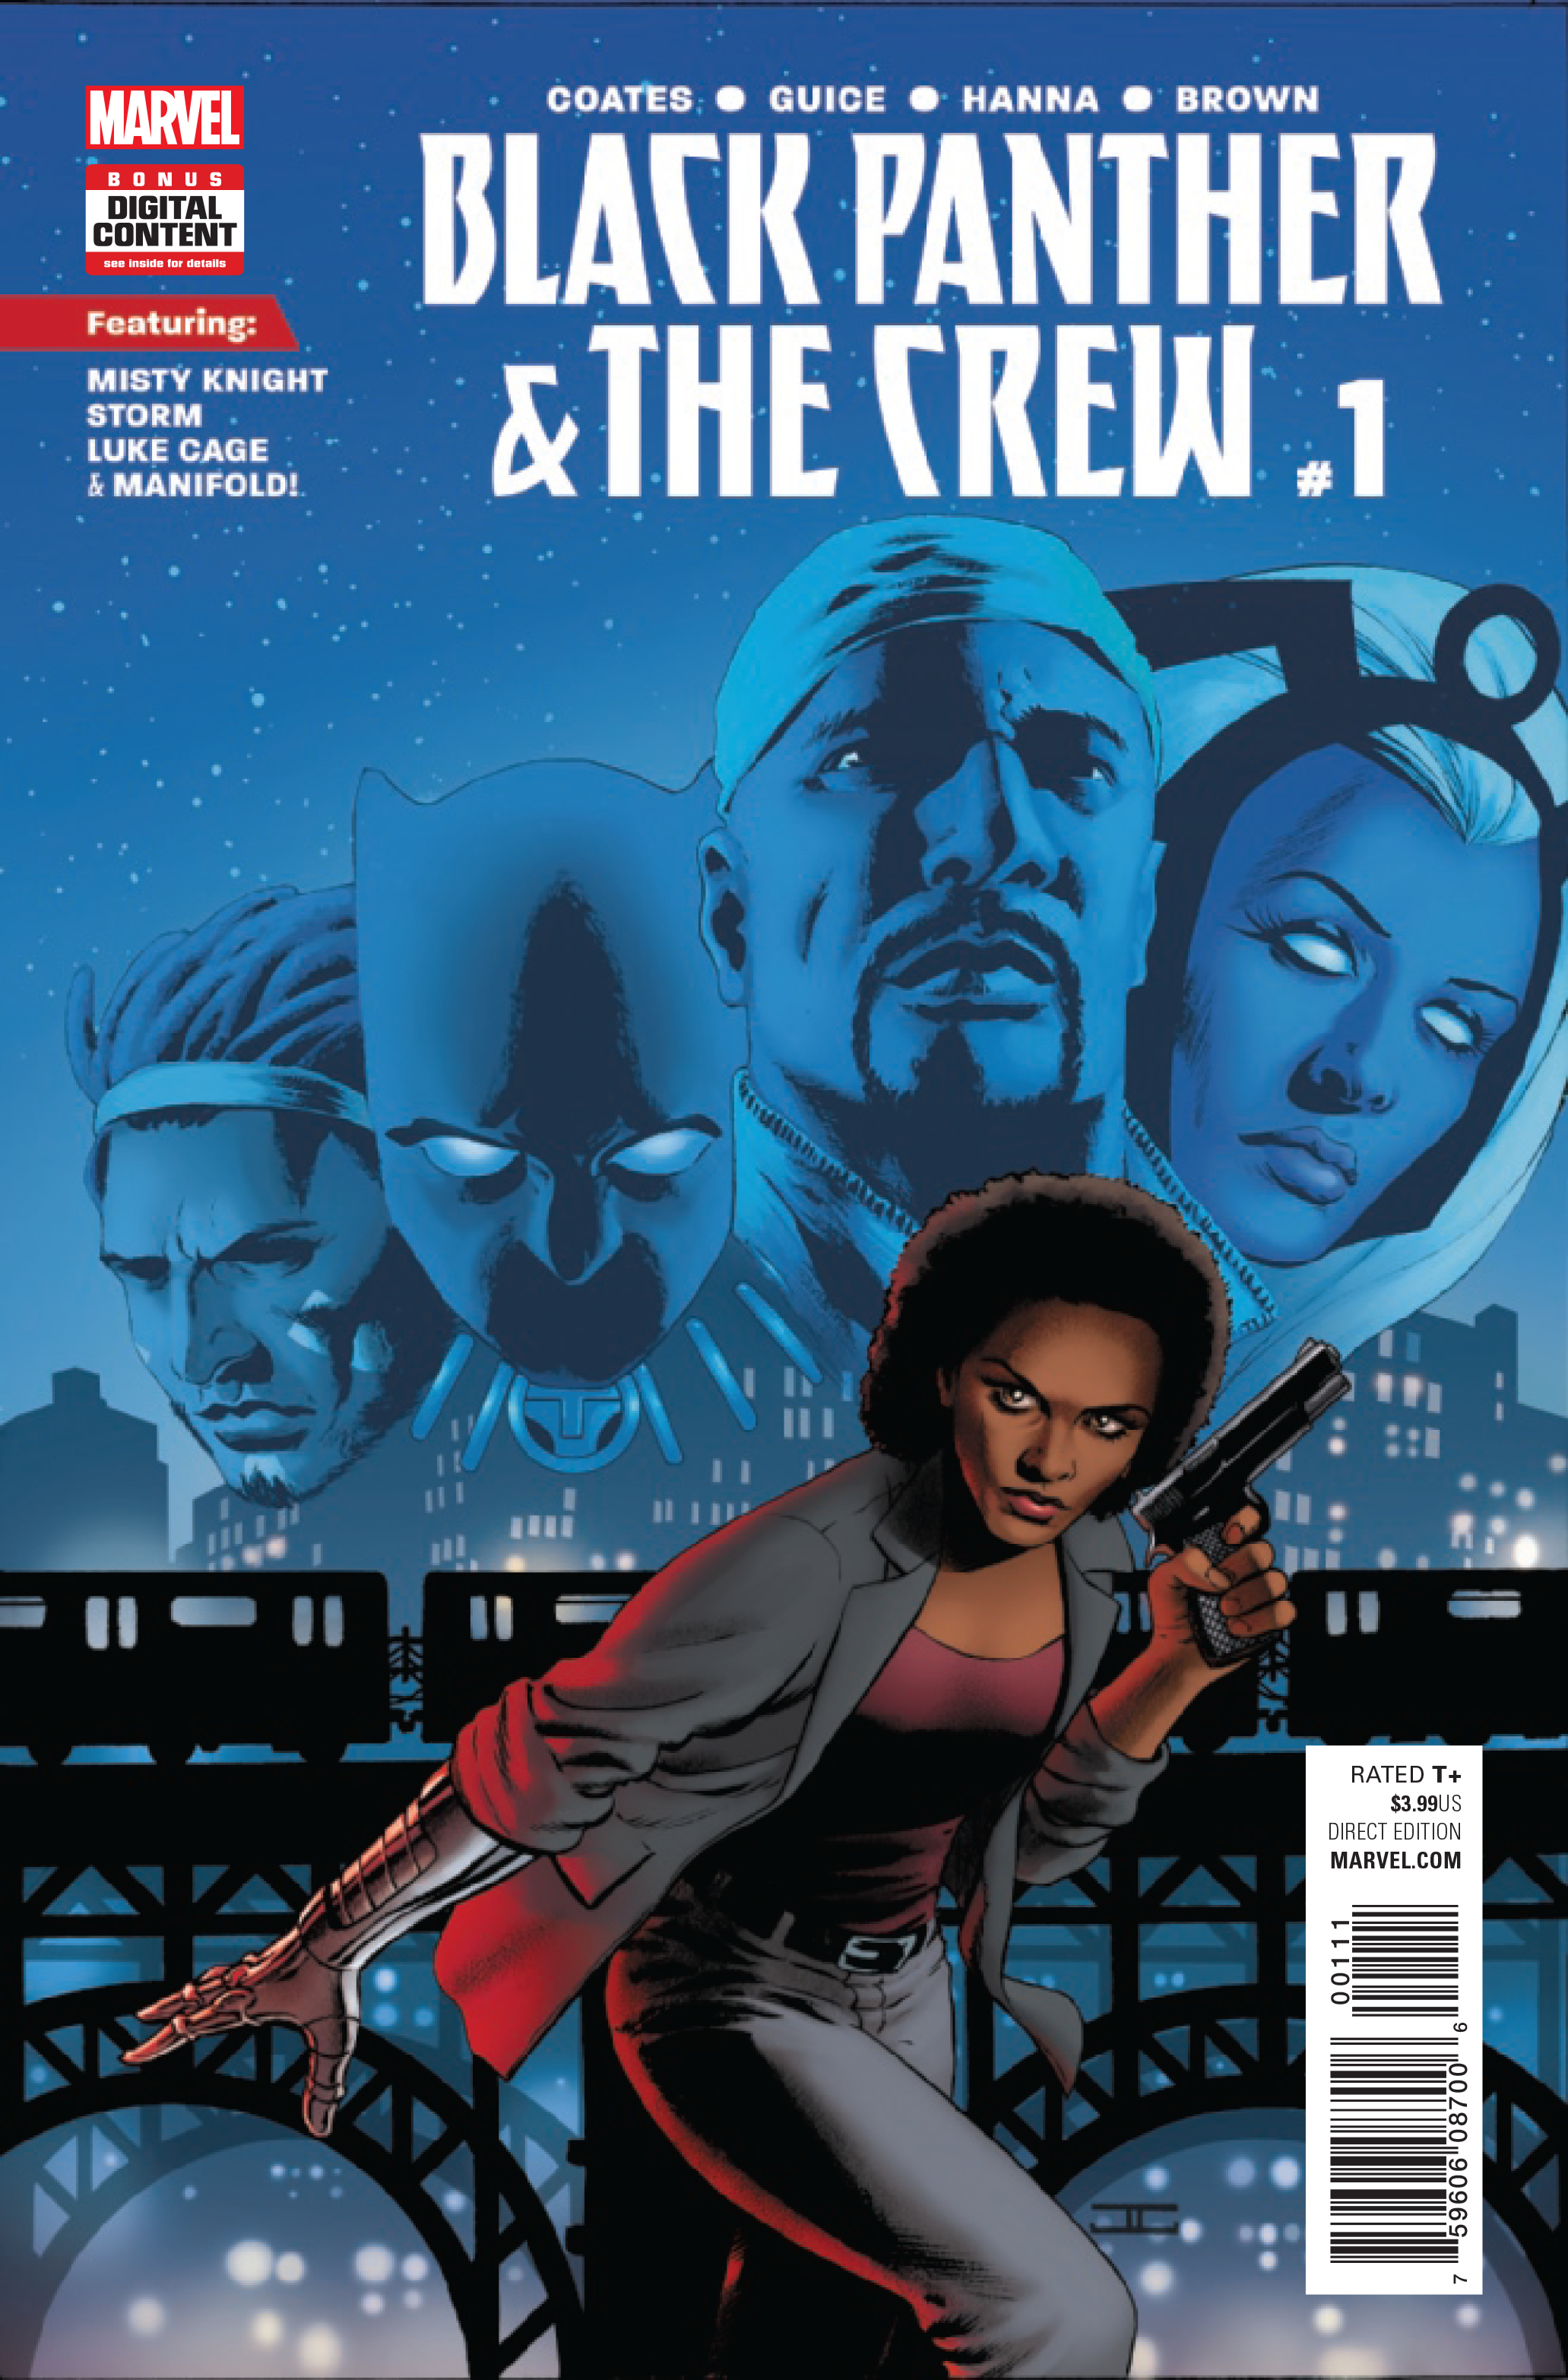 Black Panther and the Crew no. 1 (2017 Series)